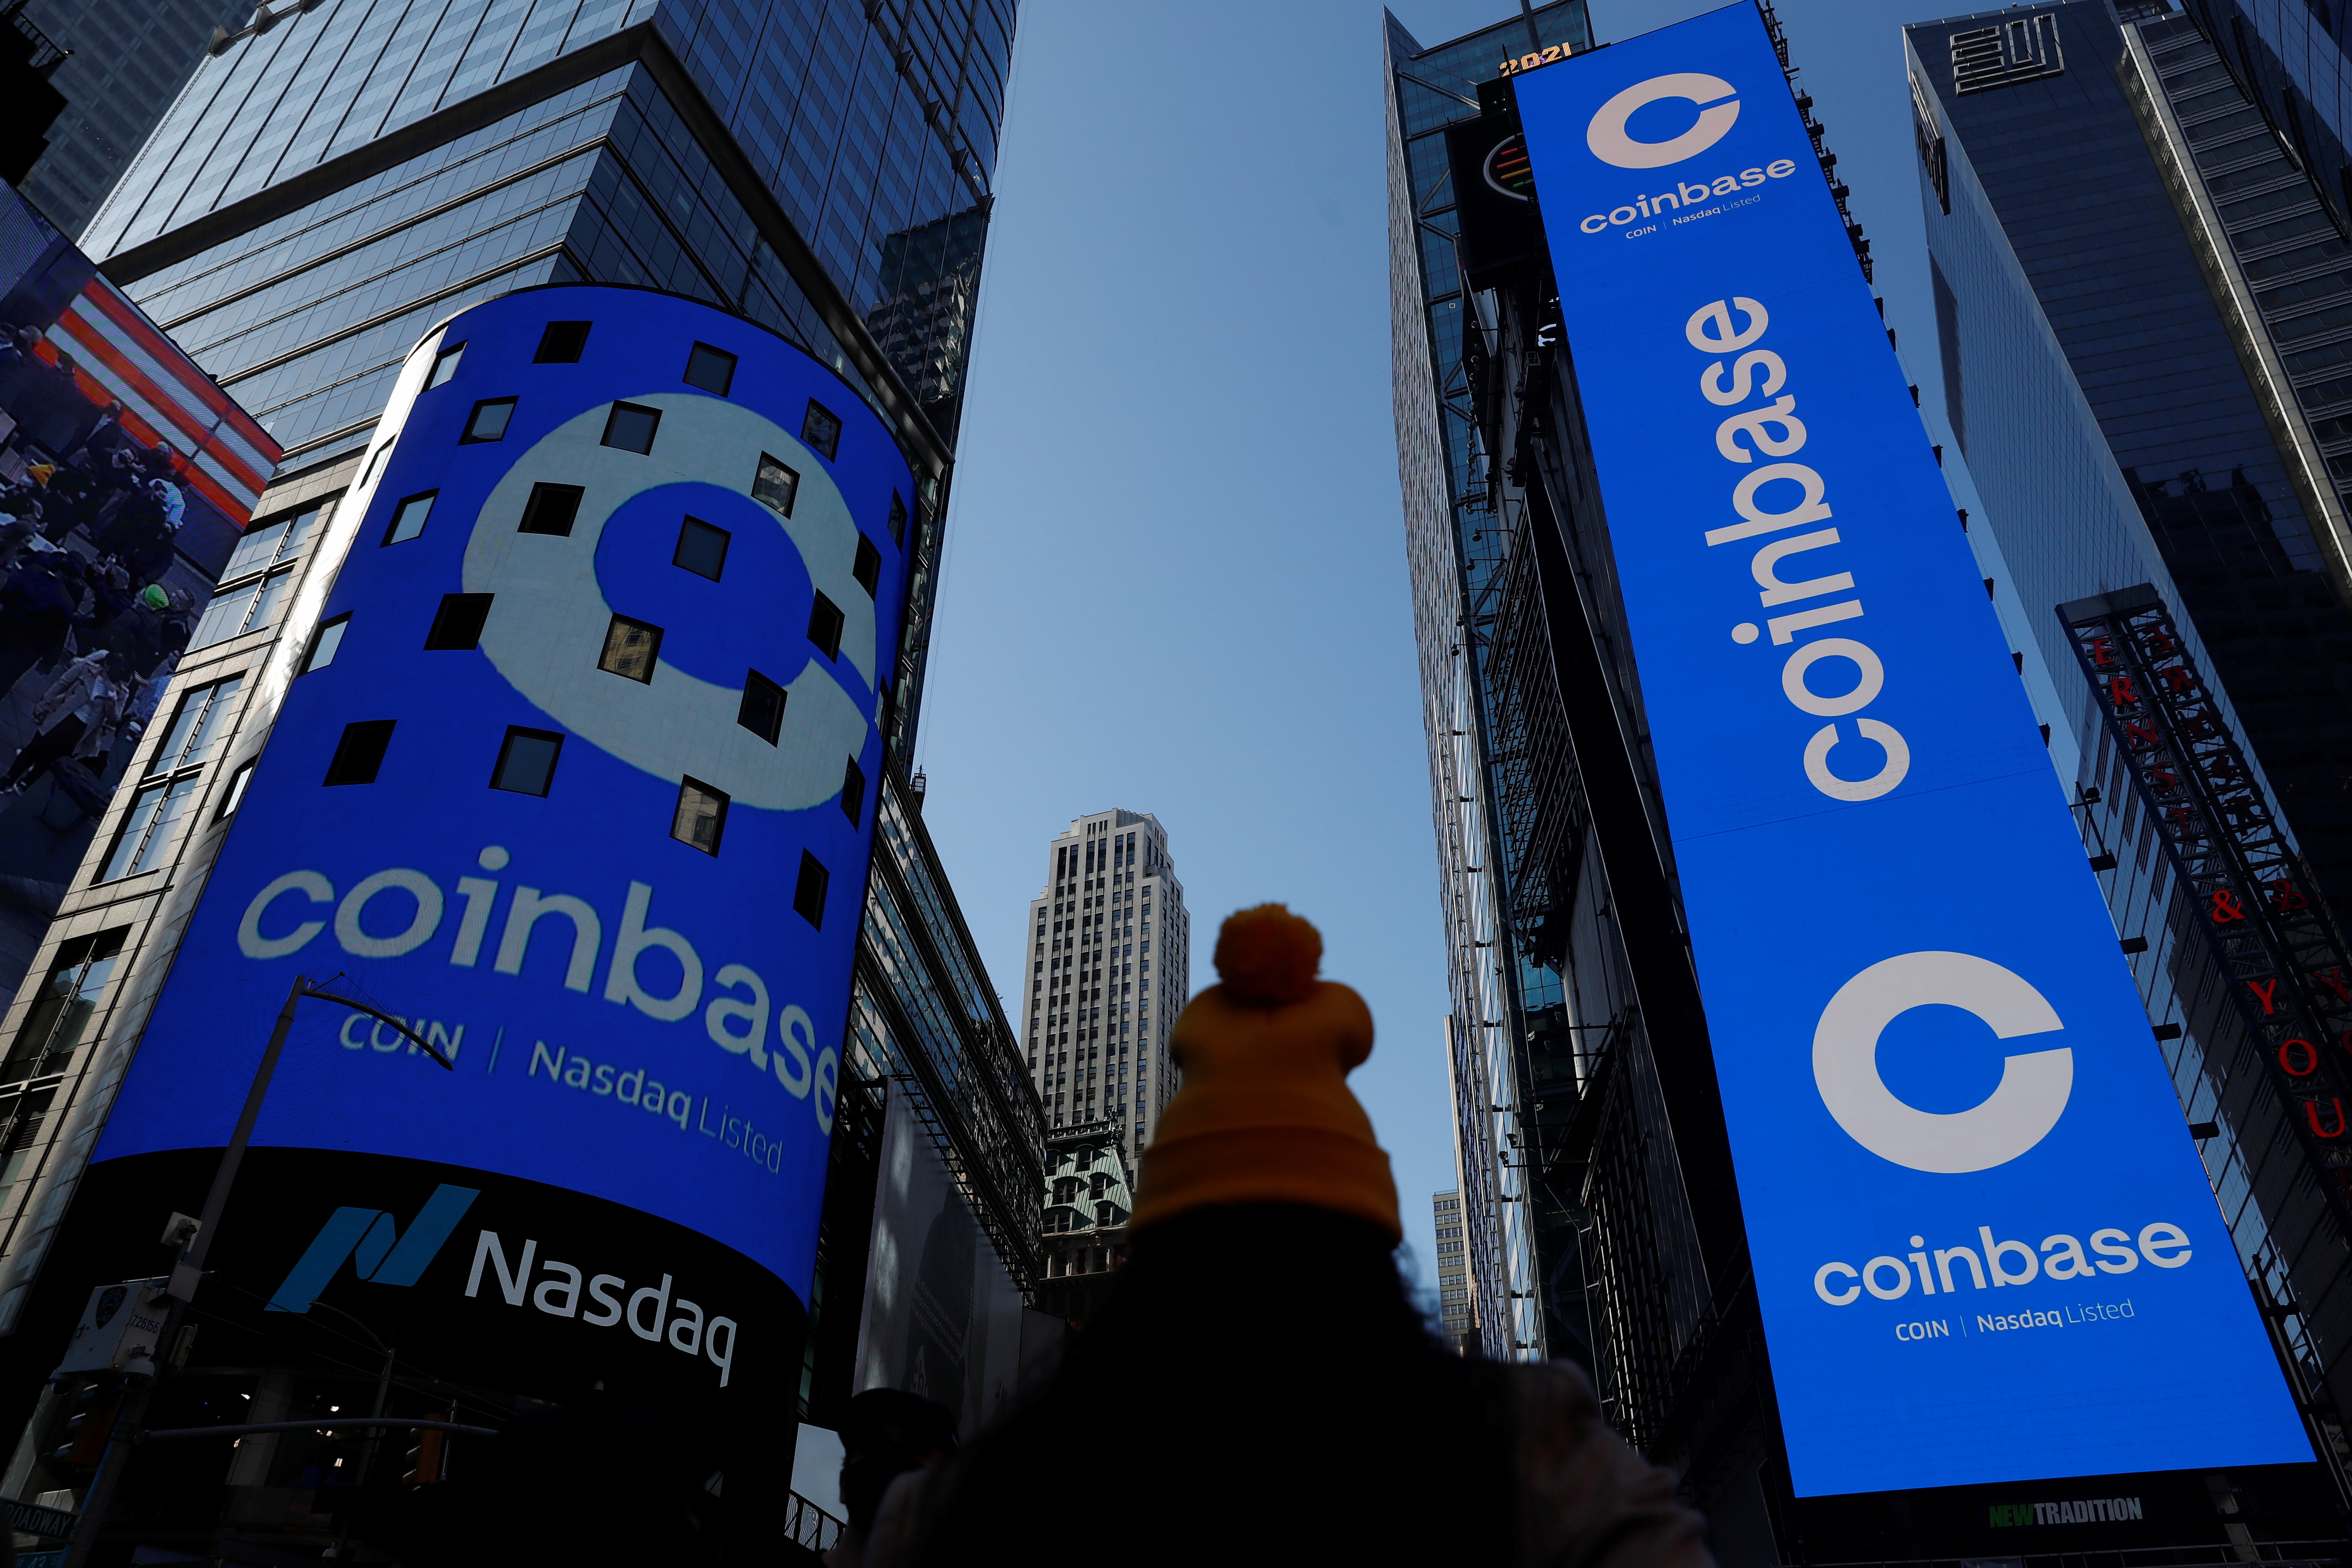 Sotheby’s and CoinBase together to sell Banksy in cryptocurrencies